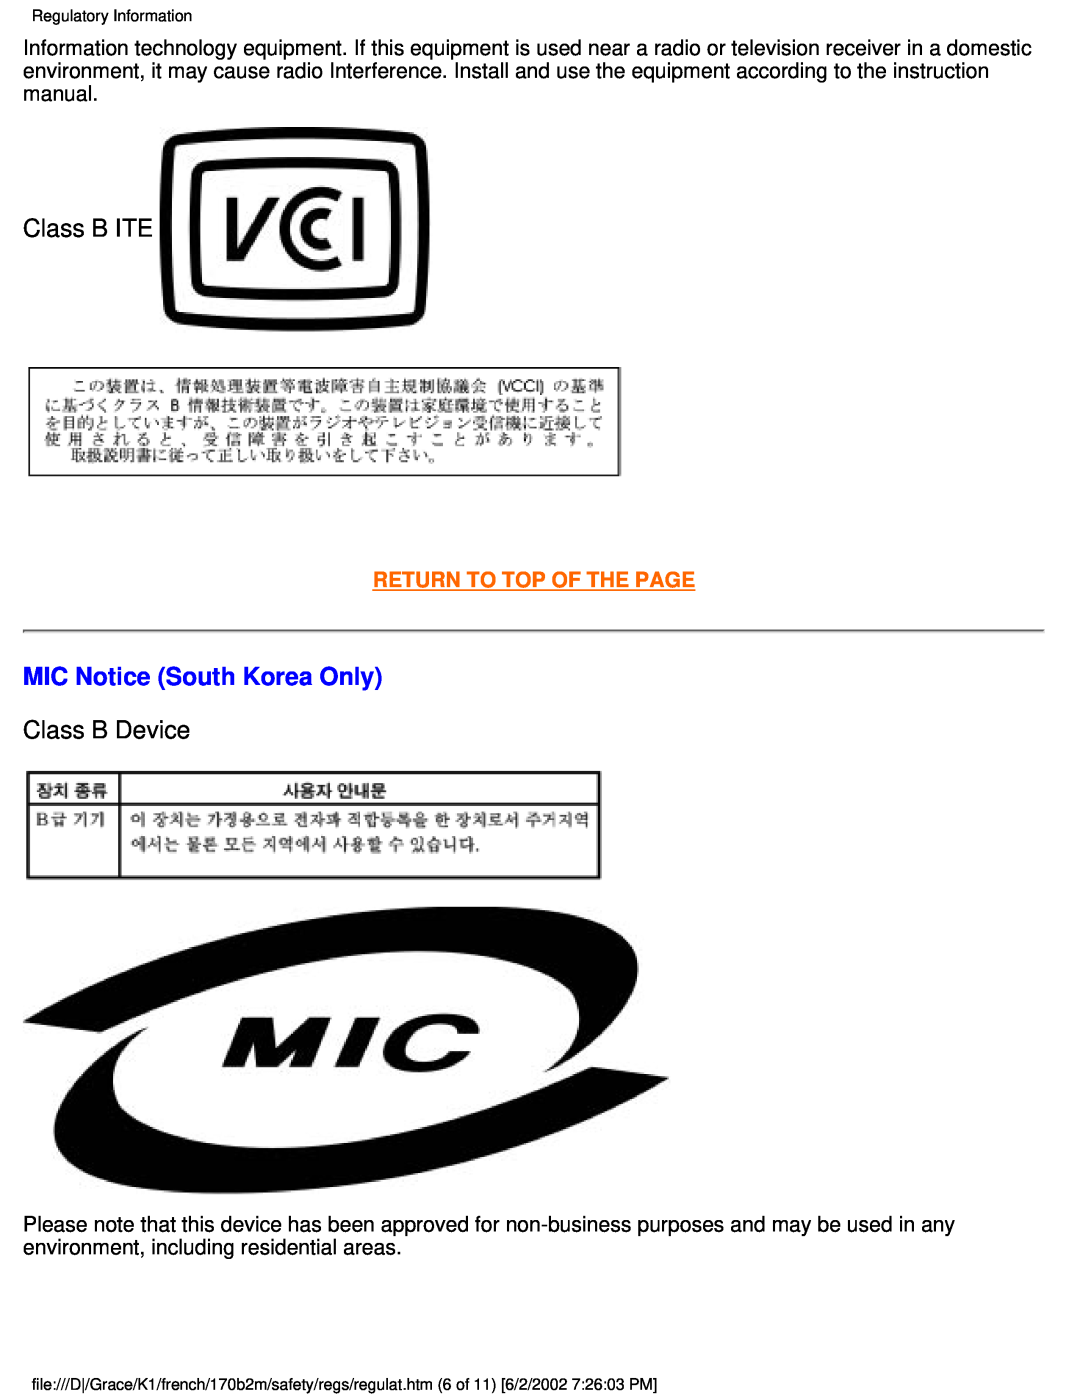 Philips 170B2M user manual Class B ITE, MIC Notice South Korea Only, Class B Device, Return To Top Of The Page 